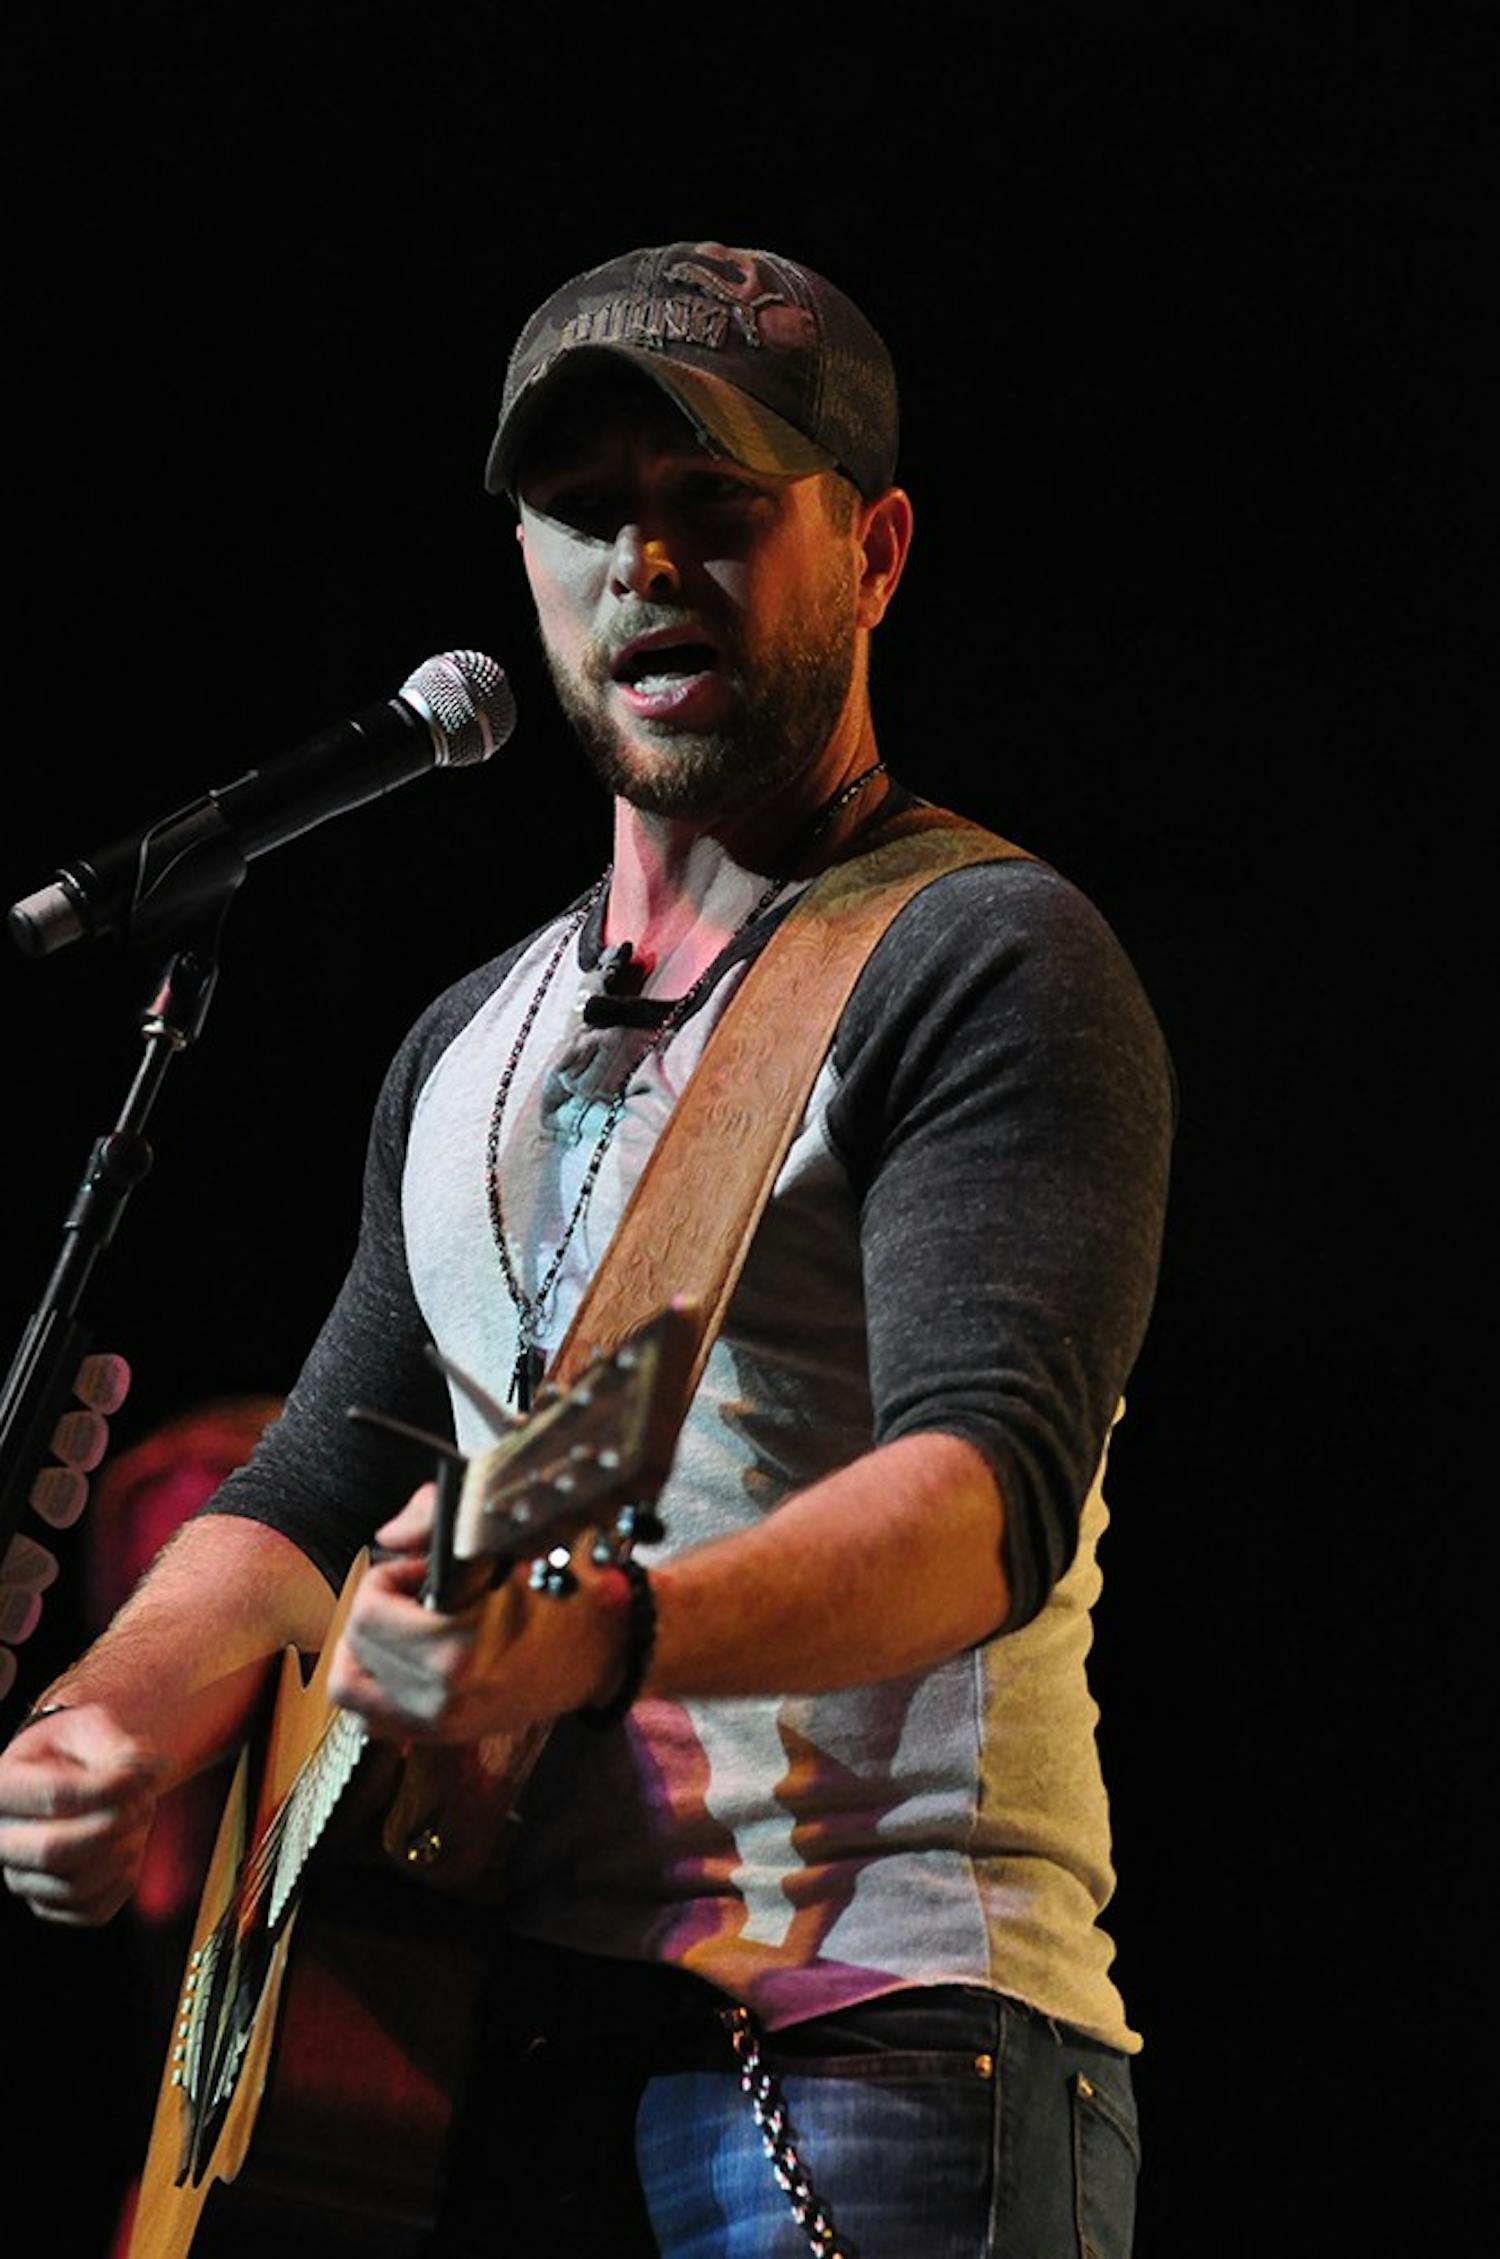 	Chris Lane sported casual attire while performing a wide range of songs from Lynyrd Skynyrd to Fat Joe.